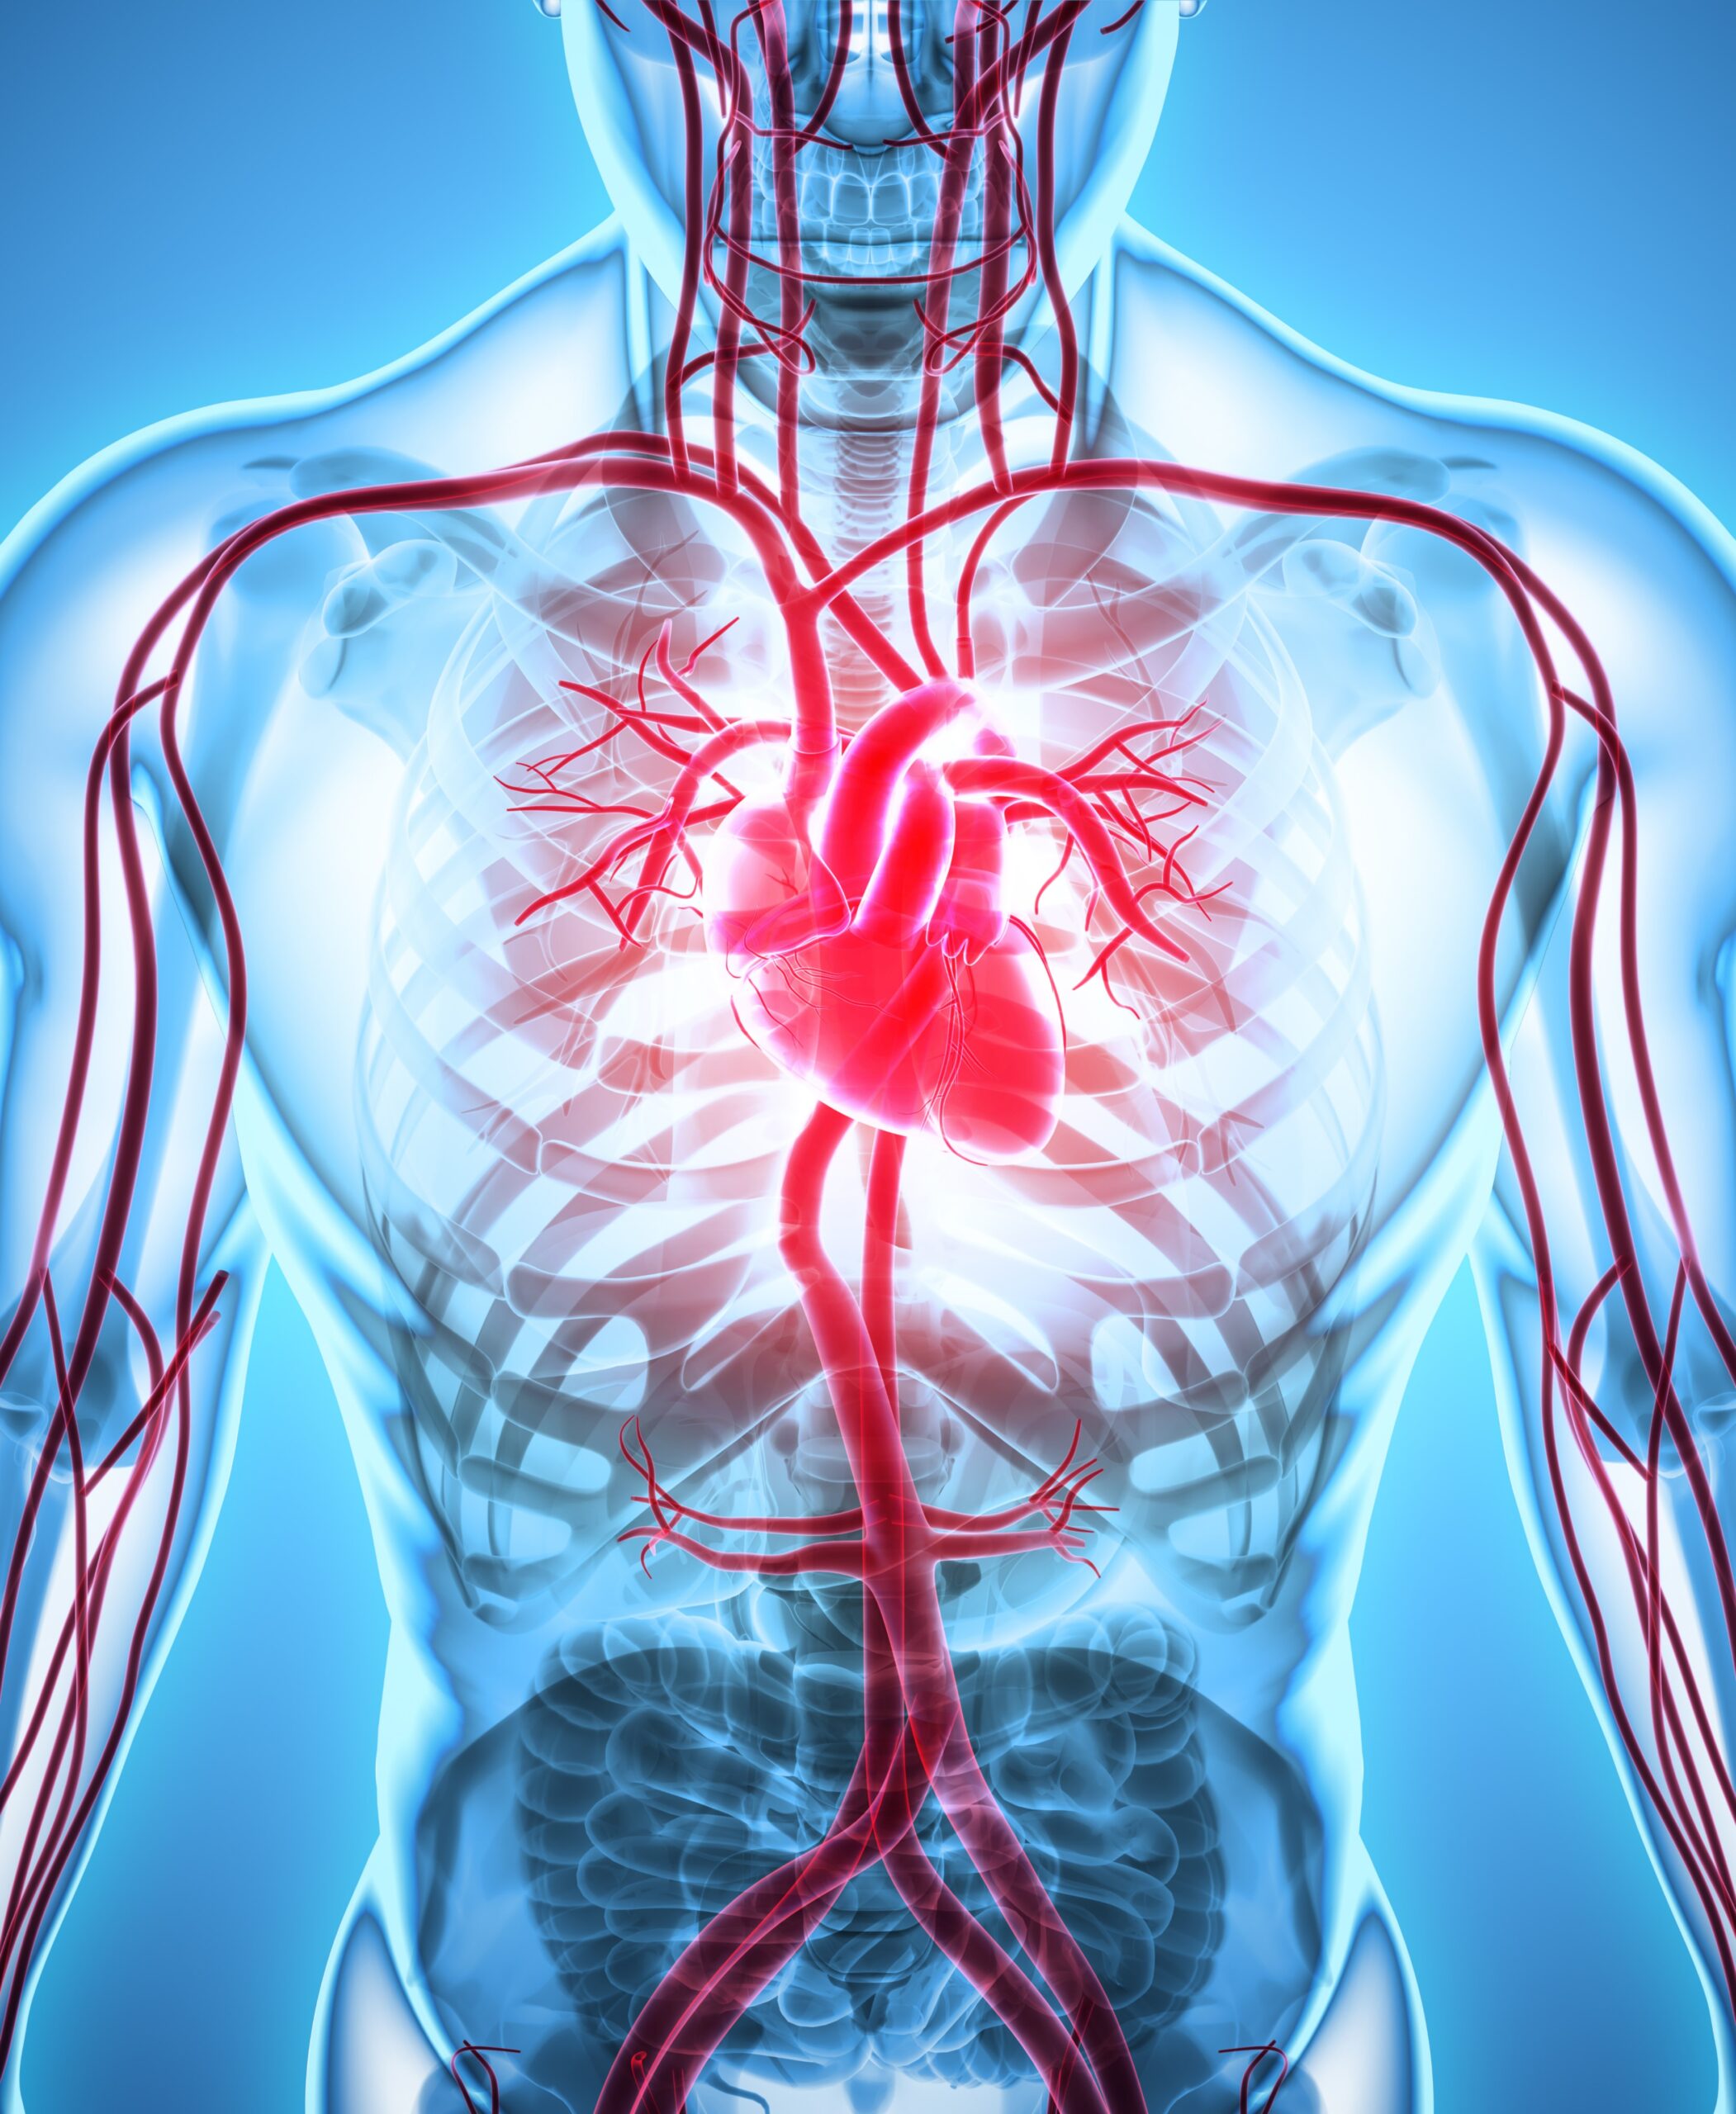 Potential Treatment & Cause Of Hardening Of The Arteries Identified